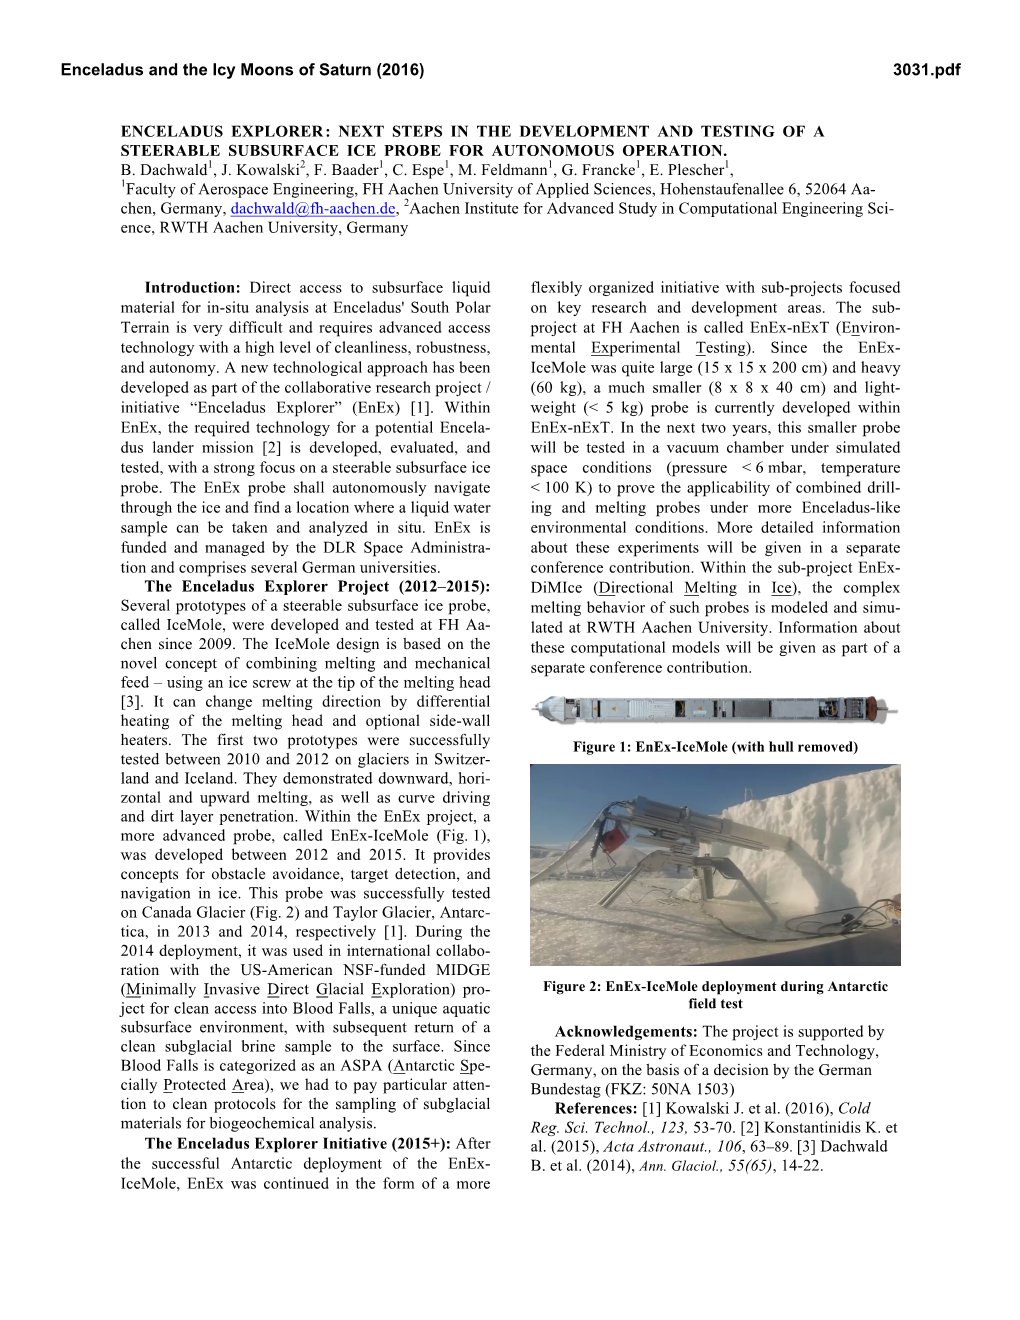 Enceladus Explorer: Next Steps in the Development and Testing of a Steerable Subsurface Ice Probe for Autonomous Operation